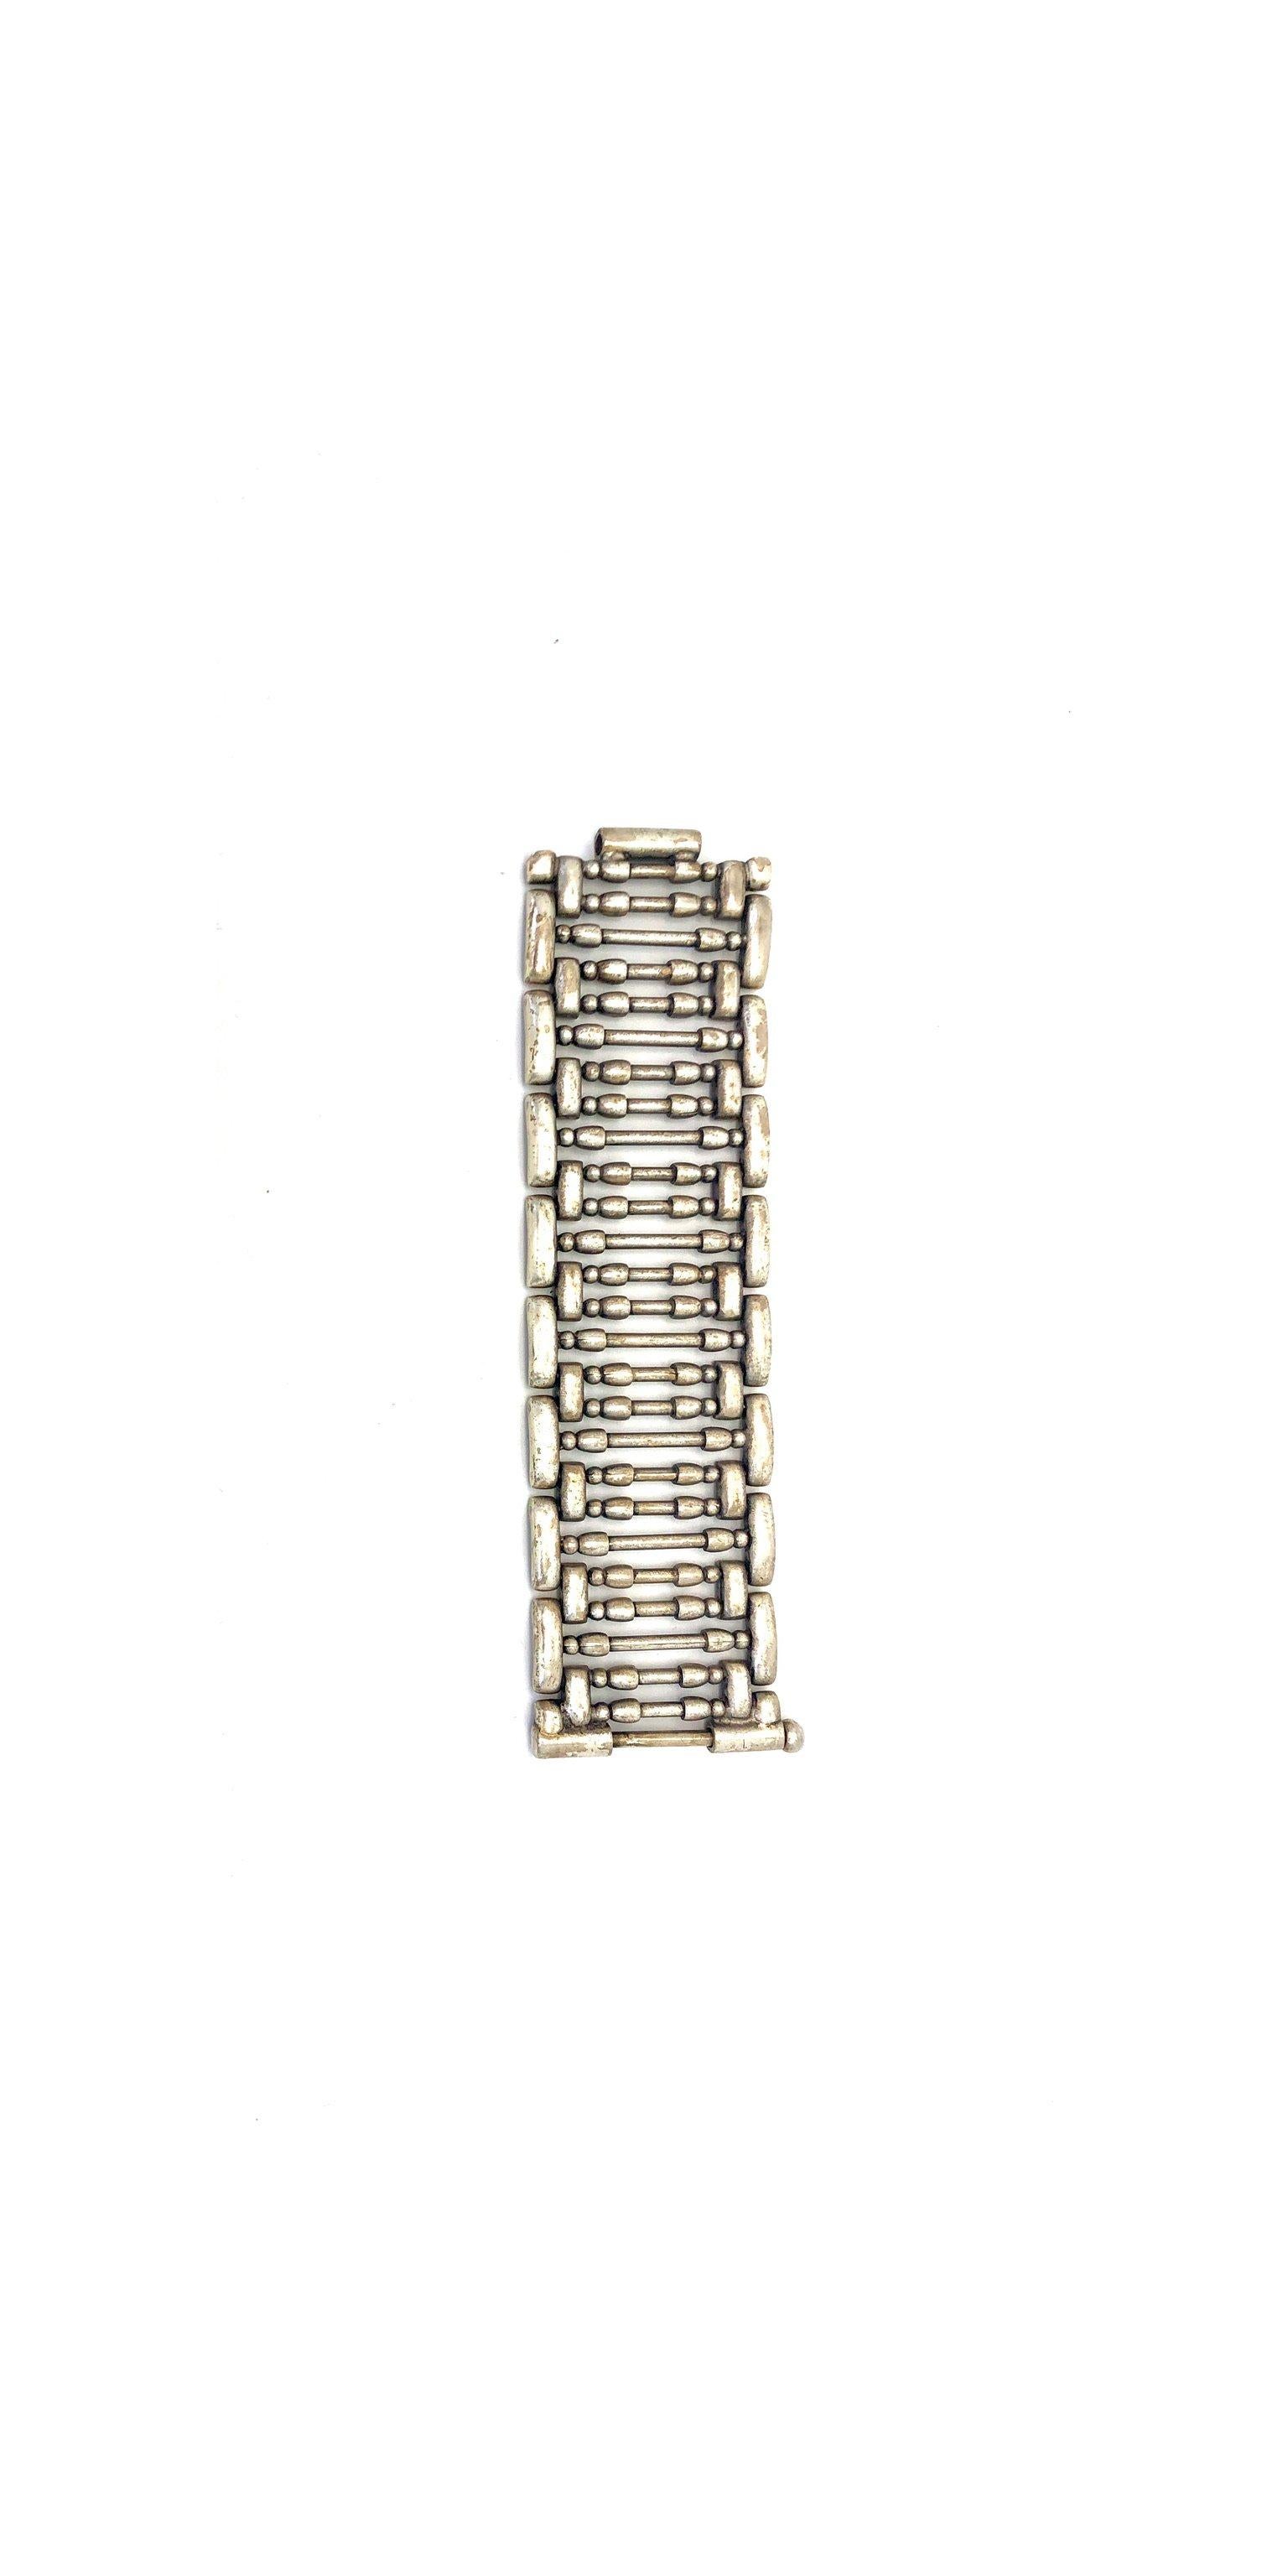 Jean Paul Gaultier Vintage Cuff Bracelet. 

This striking statement cuff is from the 90s Gaultier archive. Cast from heavyweight silver tone metal, it comprises of a multitude of metal bars framed with chunky links. It’s wide oversized silhouette